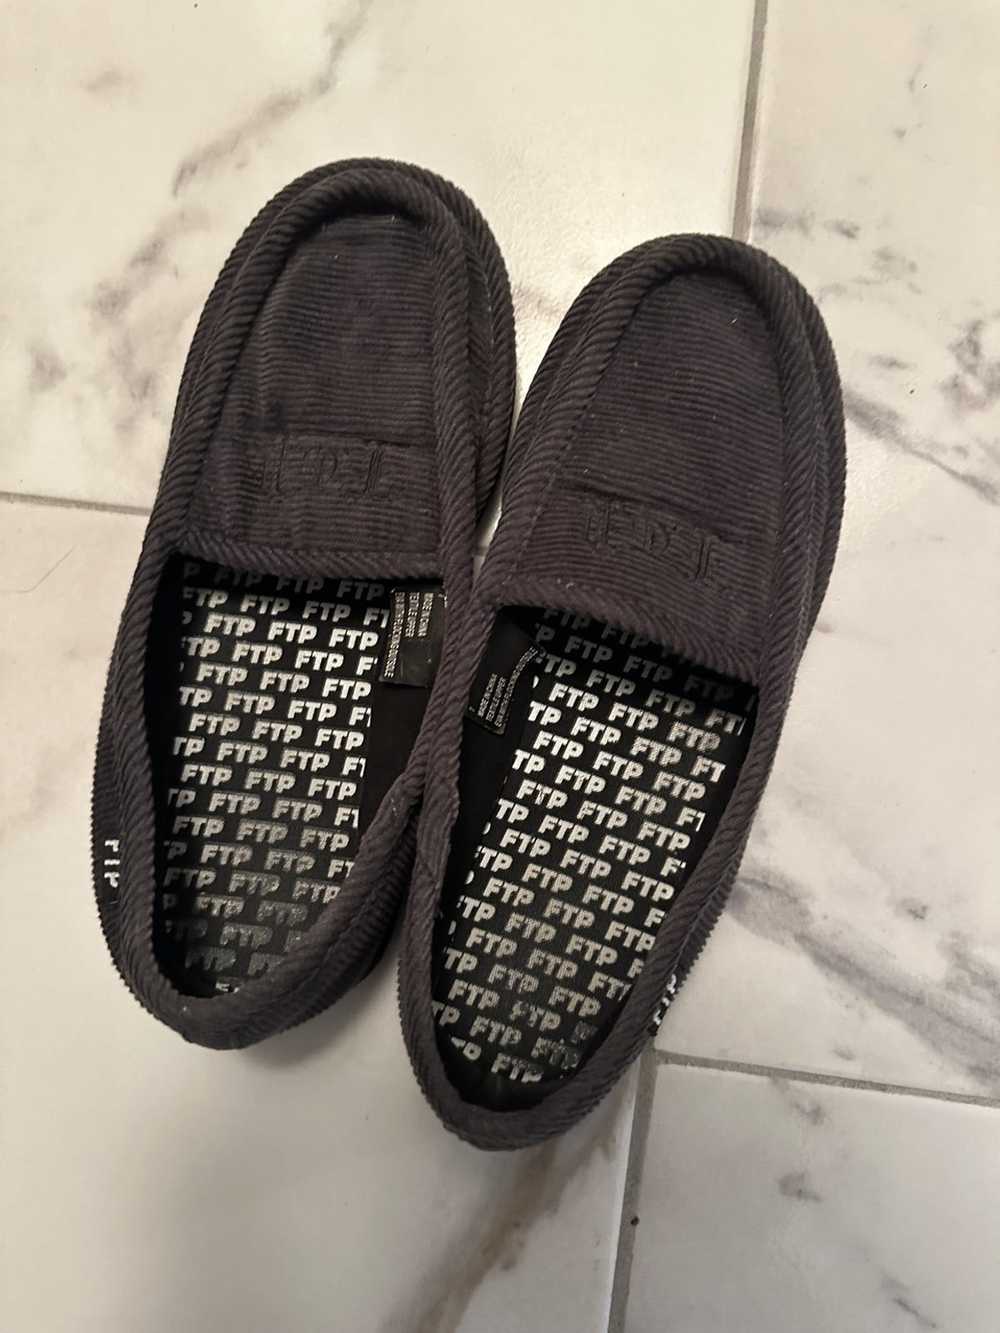 Fuck The Population Ftp house slippers - image 4